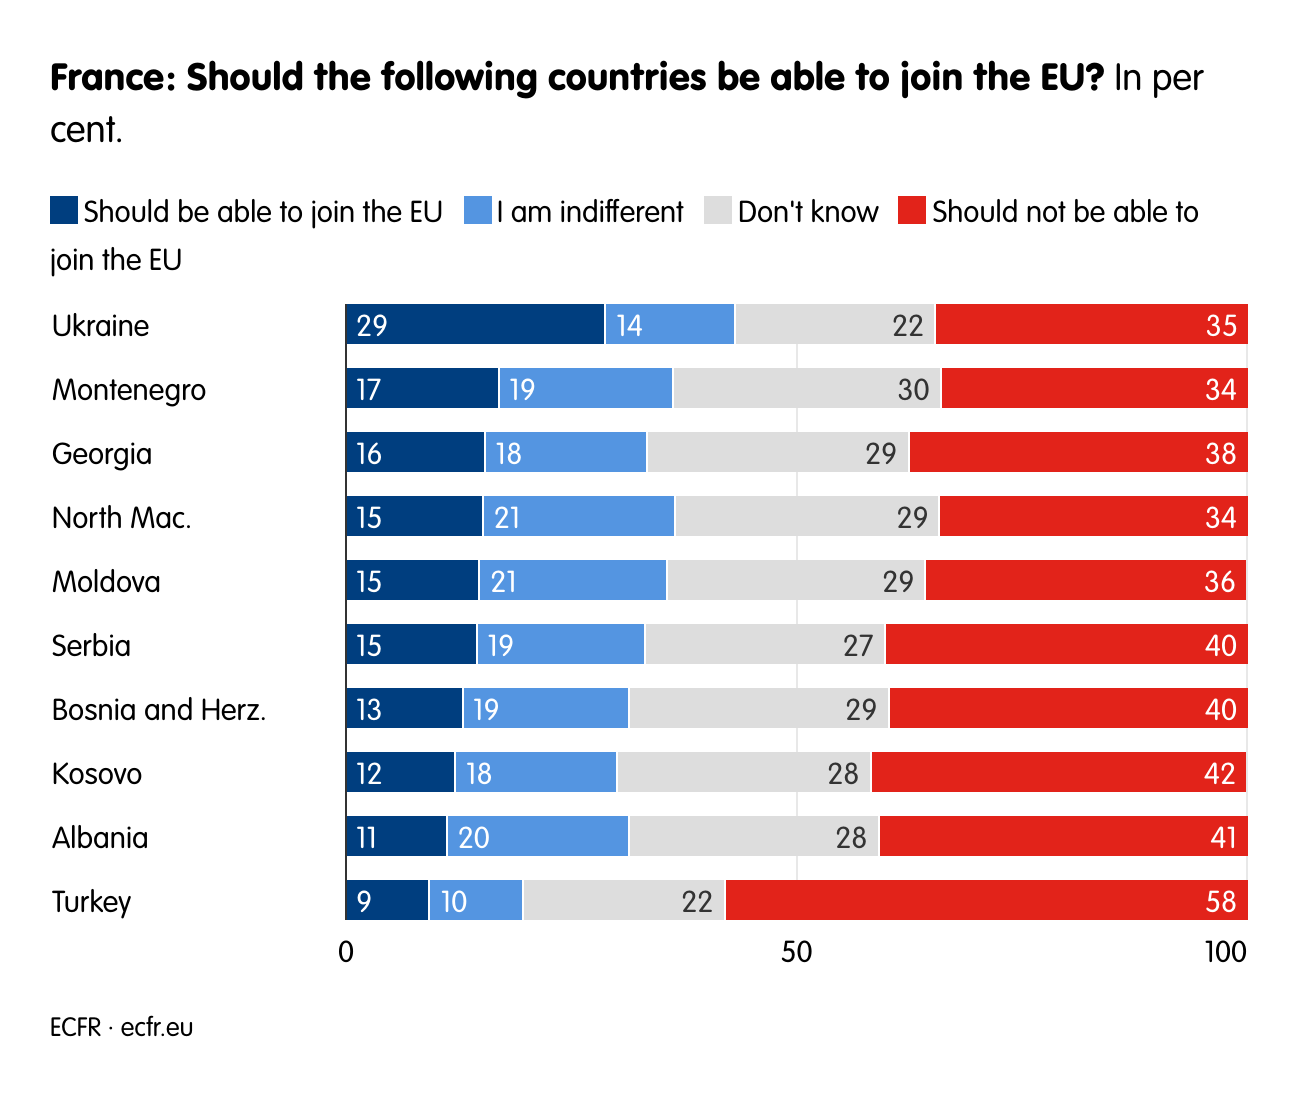 France: Should the following countries be able to join the EU?  